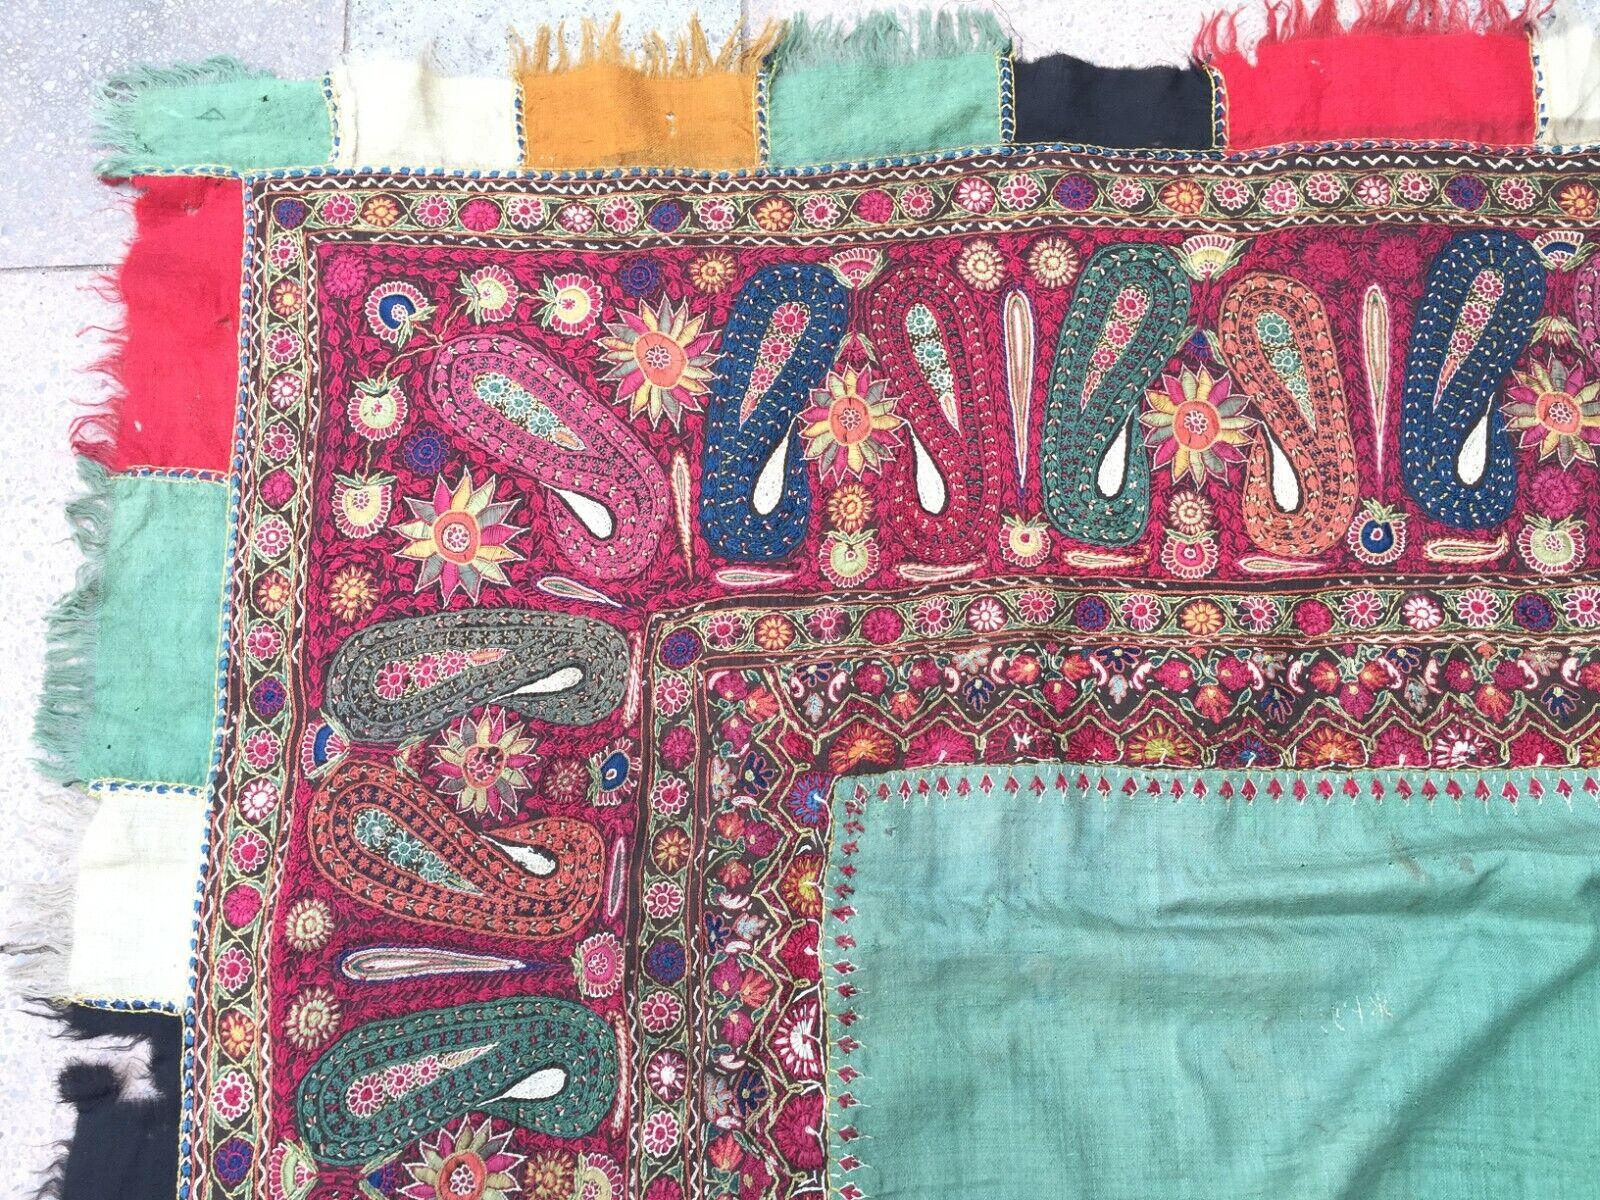 Handmade Antique Indian Kashmir Shawl 4.6' x 4.7', 1900s - 1W05 In Good Condition For Sale In Bordeaux, FR